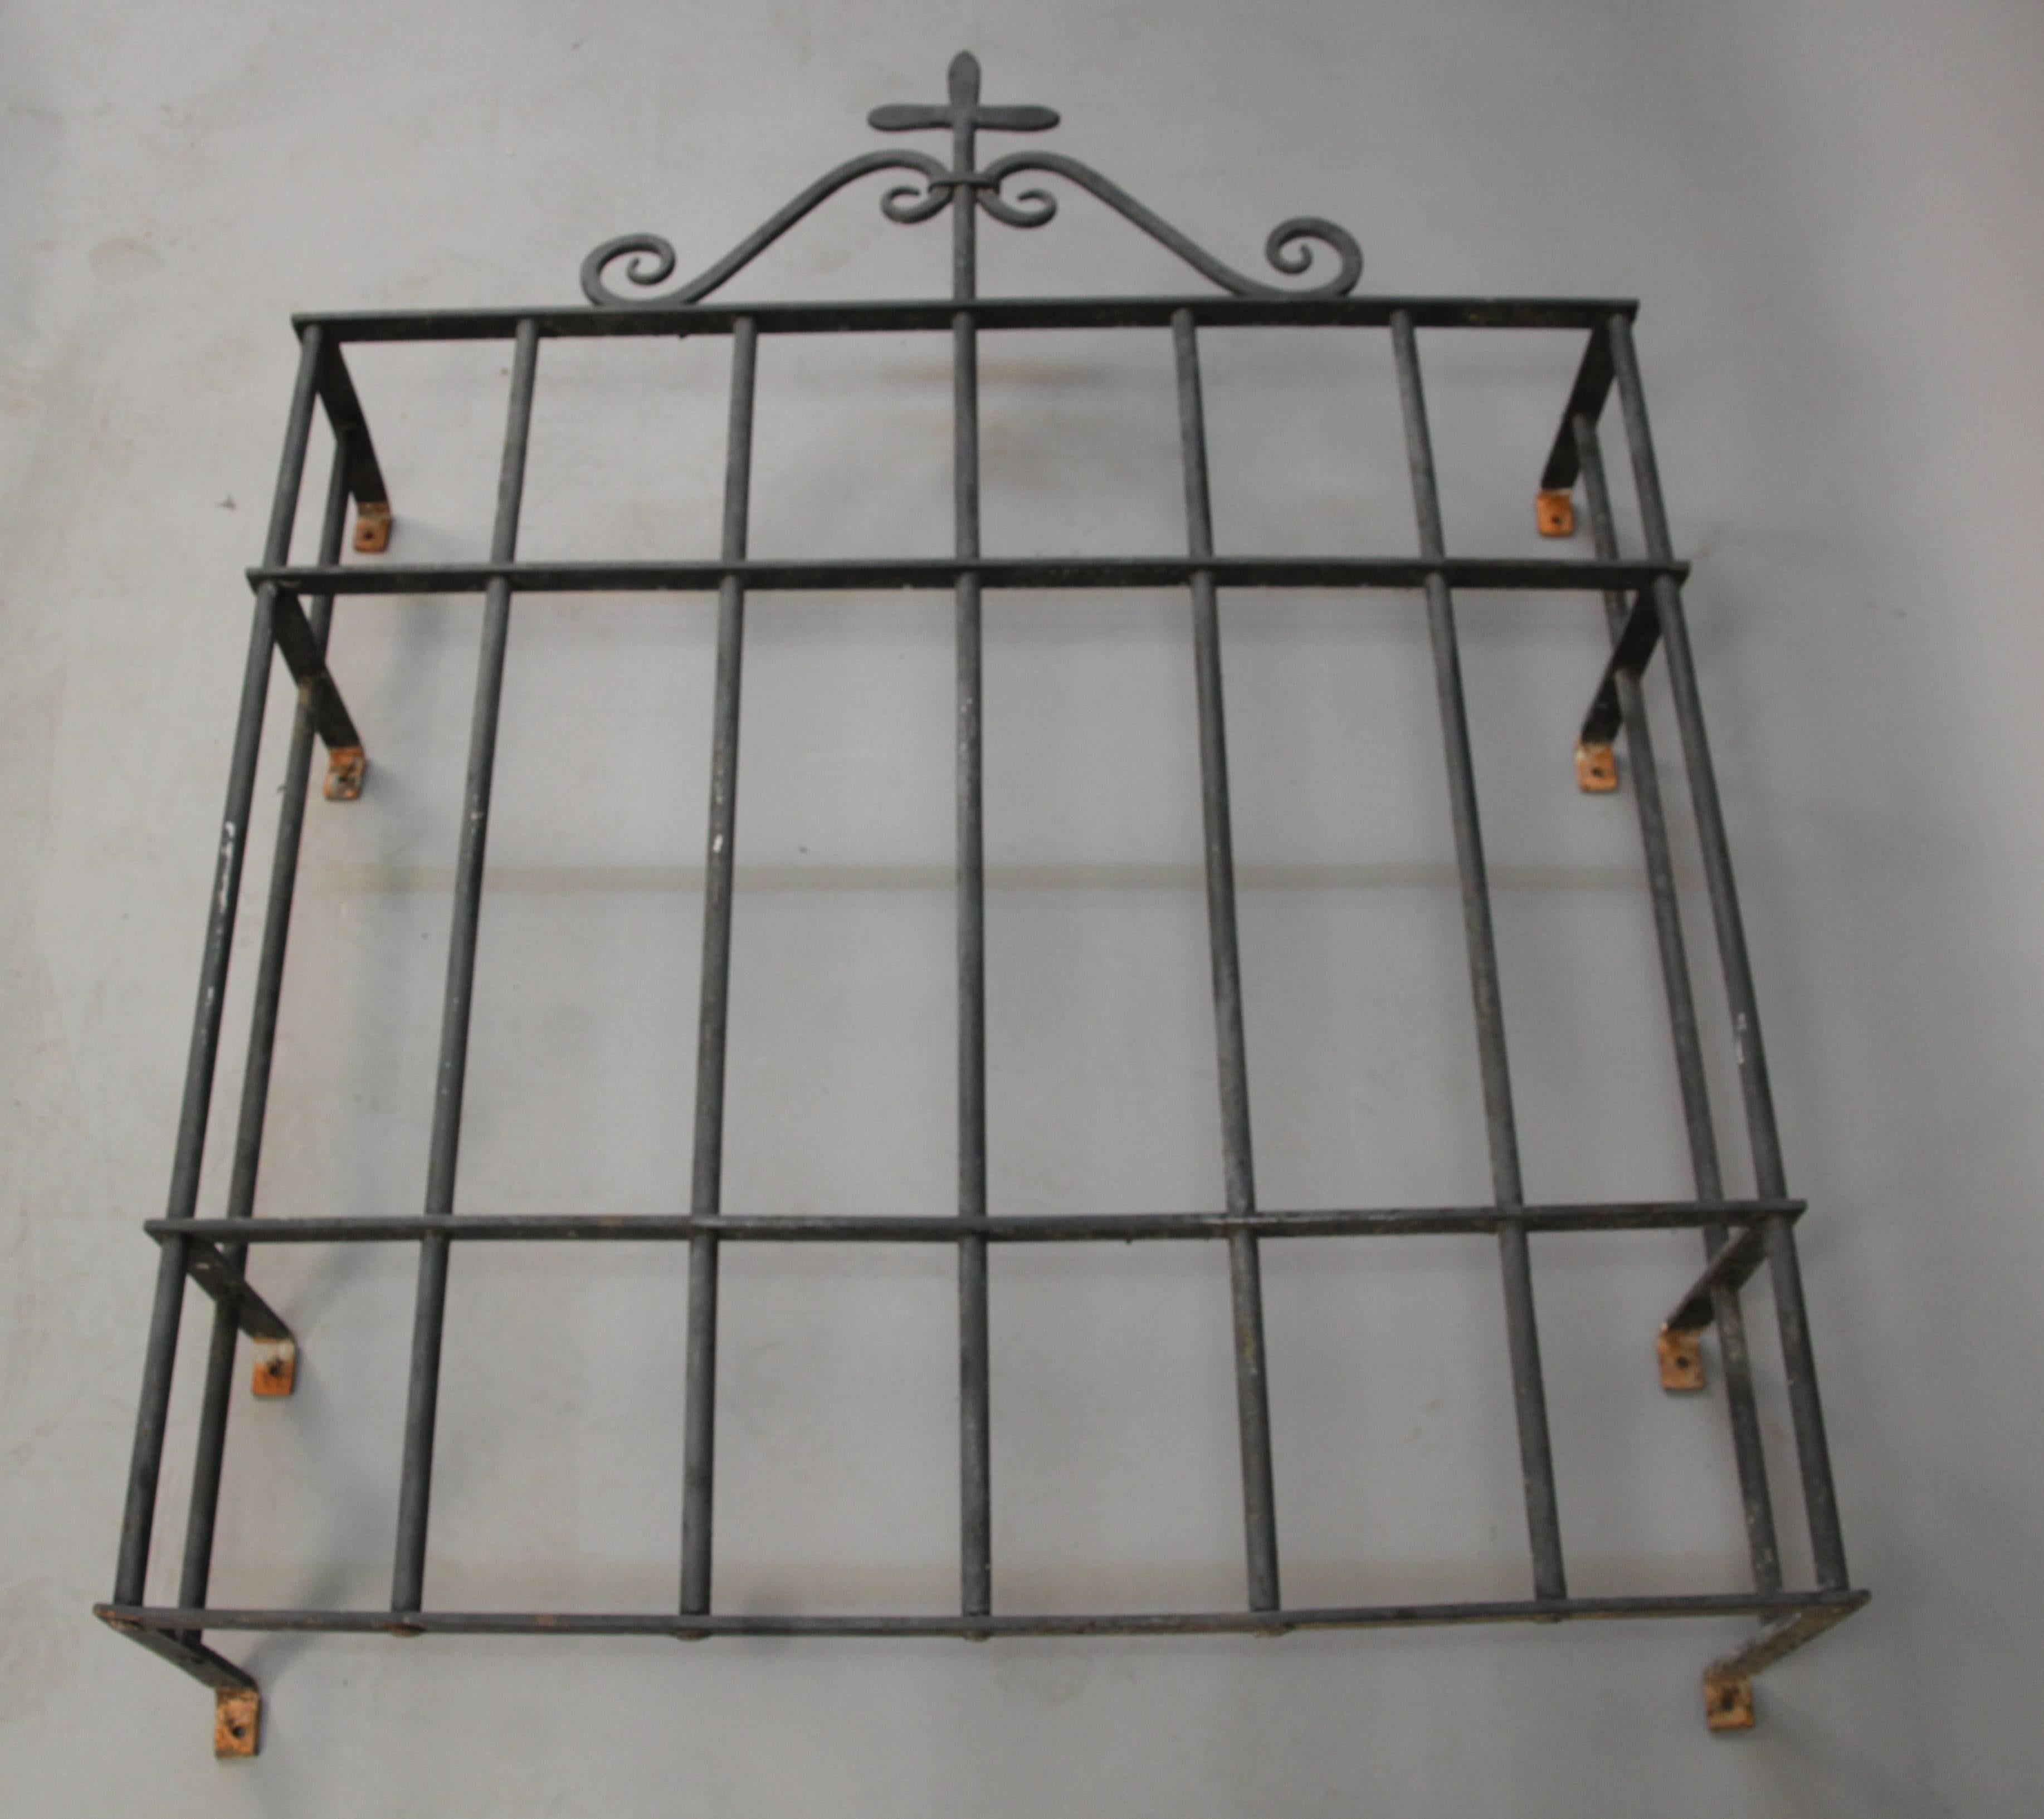 Beautiful and finely crafted 1920s wrought iron window grill. We have a matching, larger piece available. 

The overall height is 54 3/4